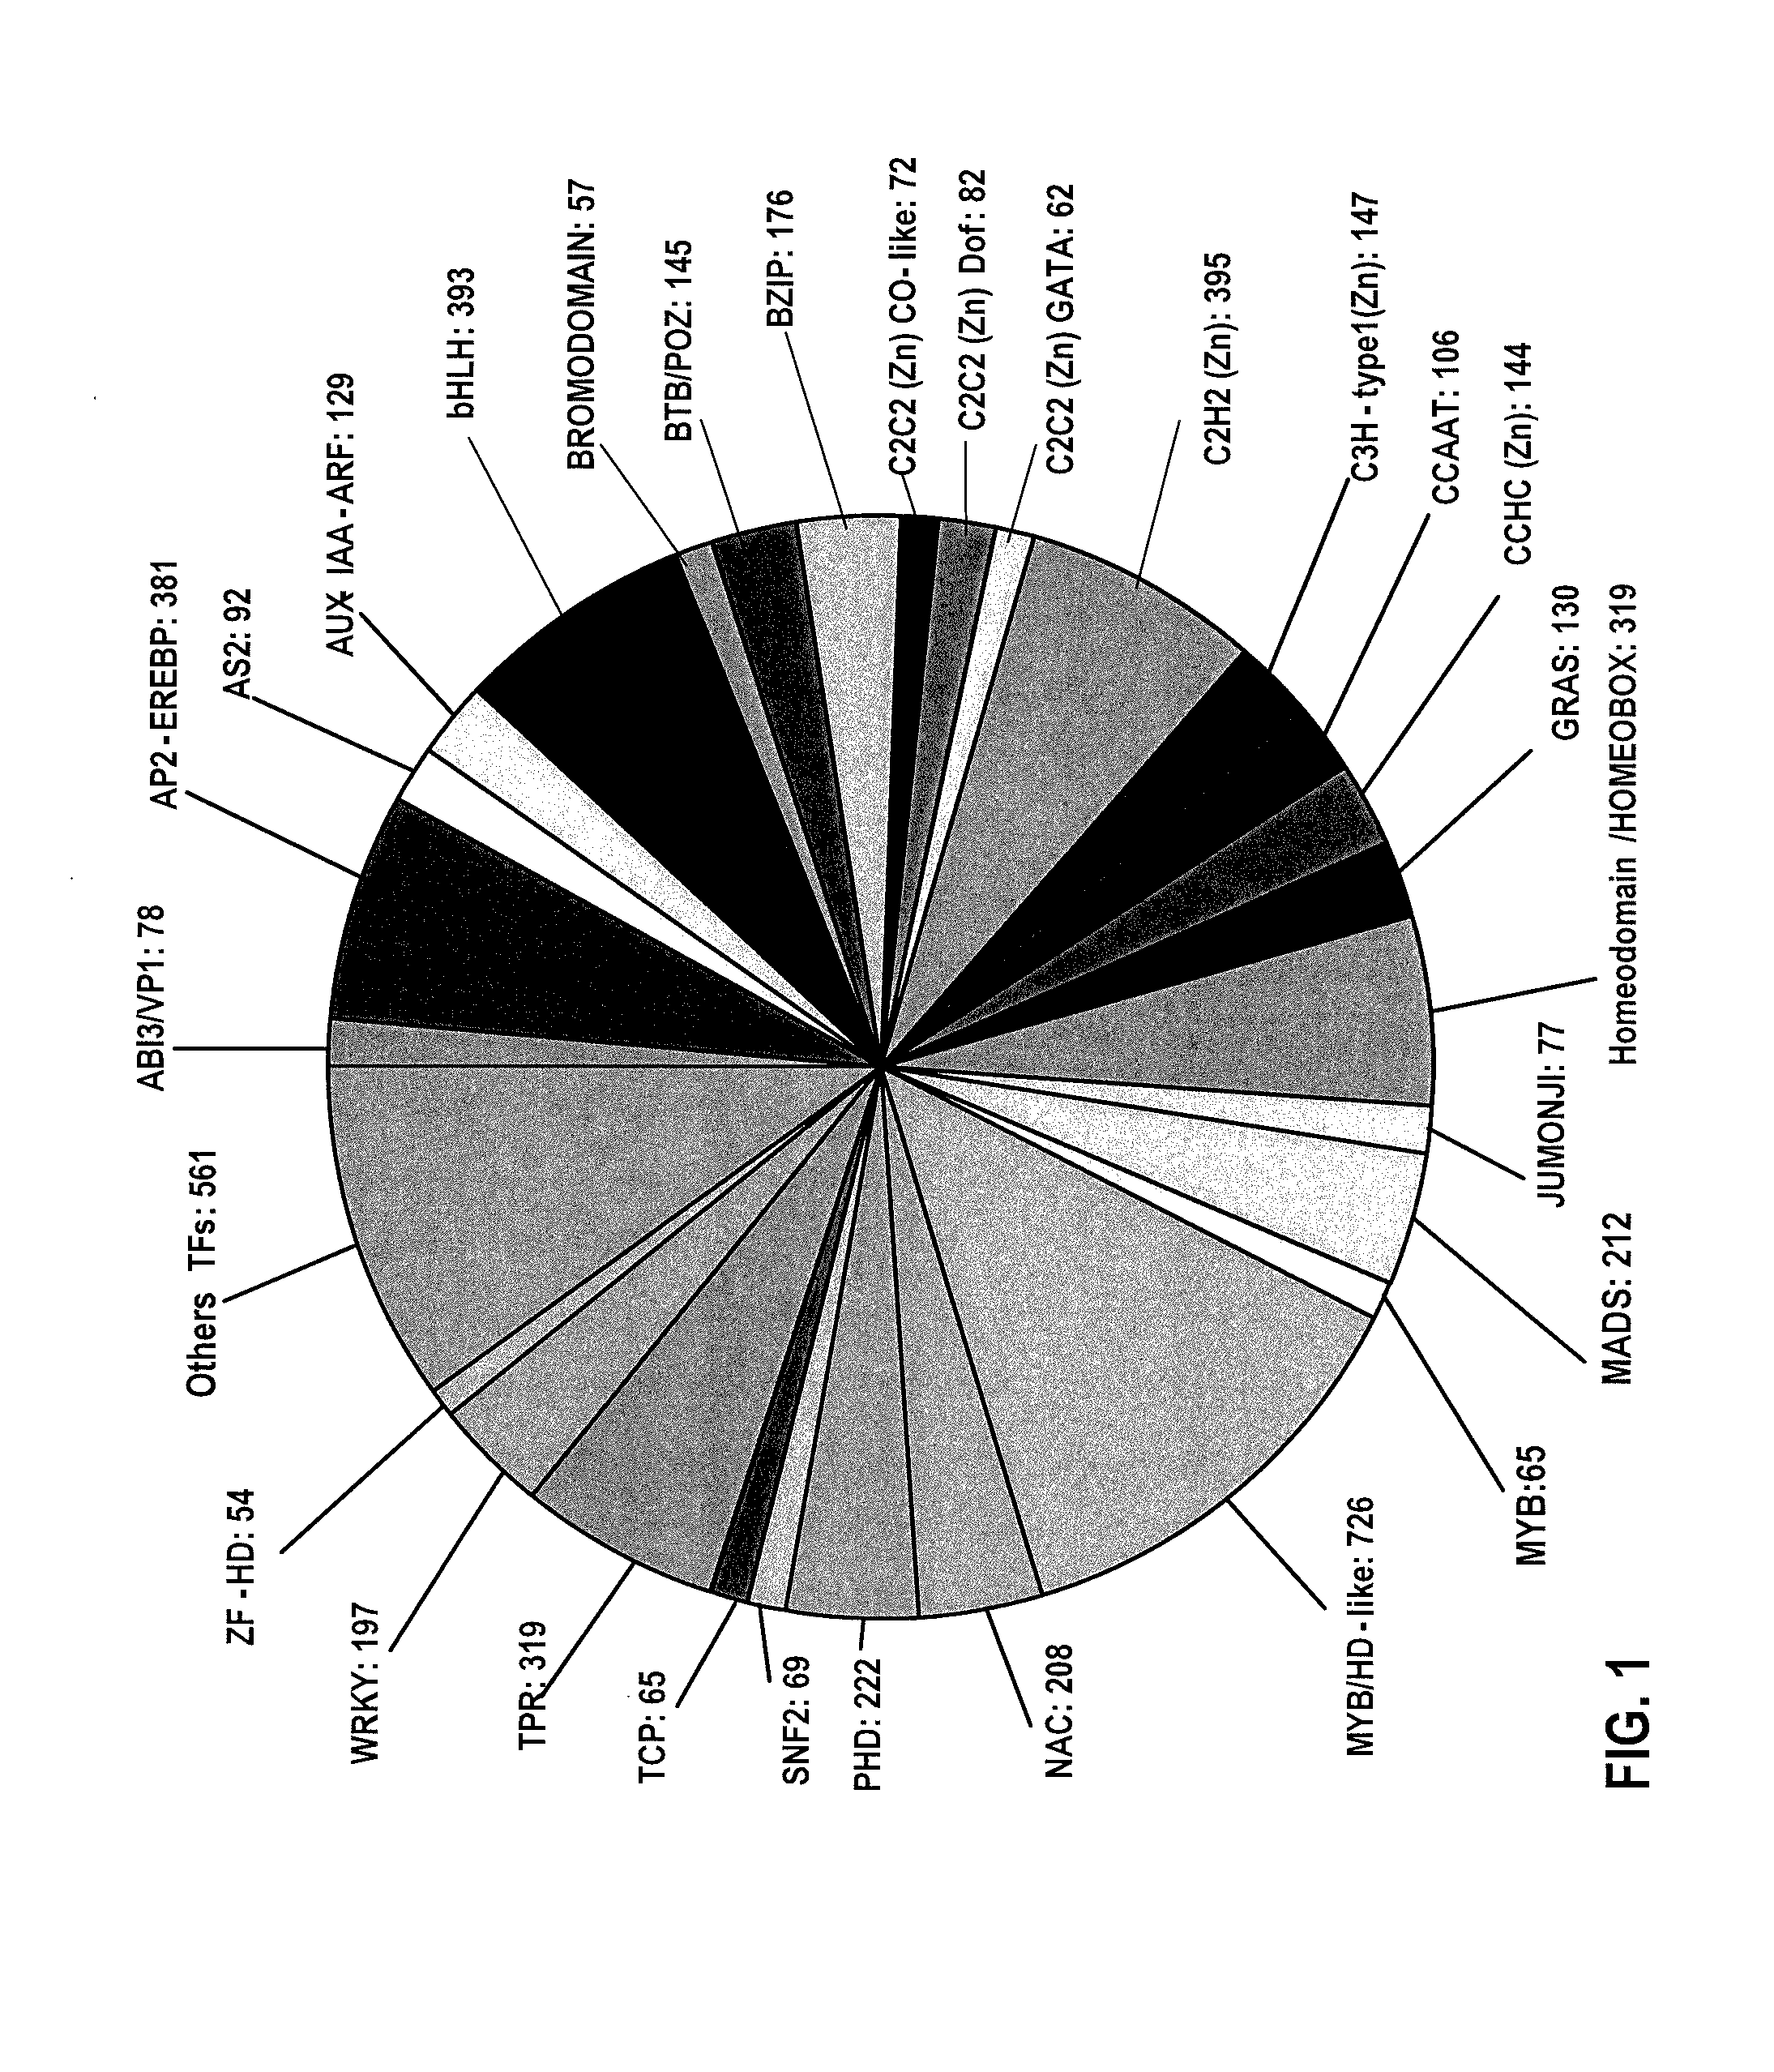 Soybean transcription factors and other genes and methods of their use